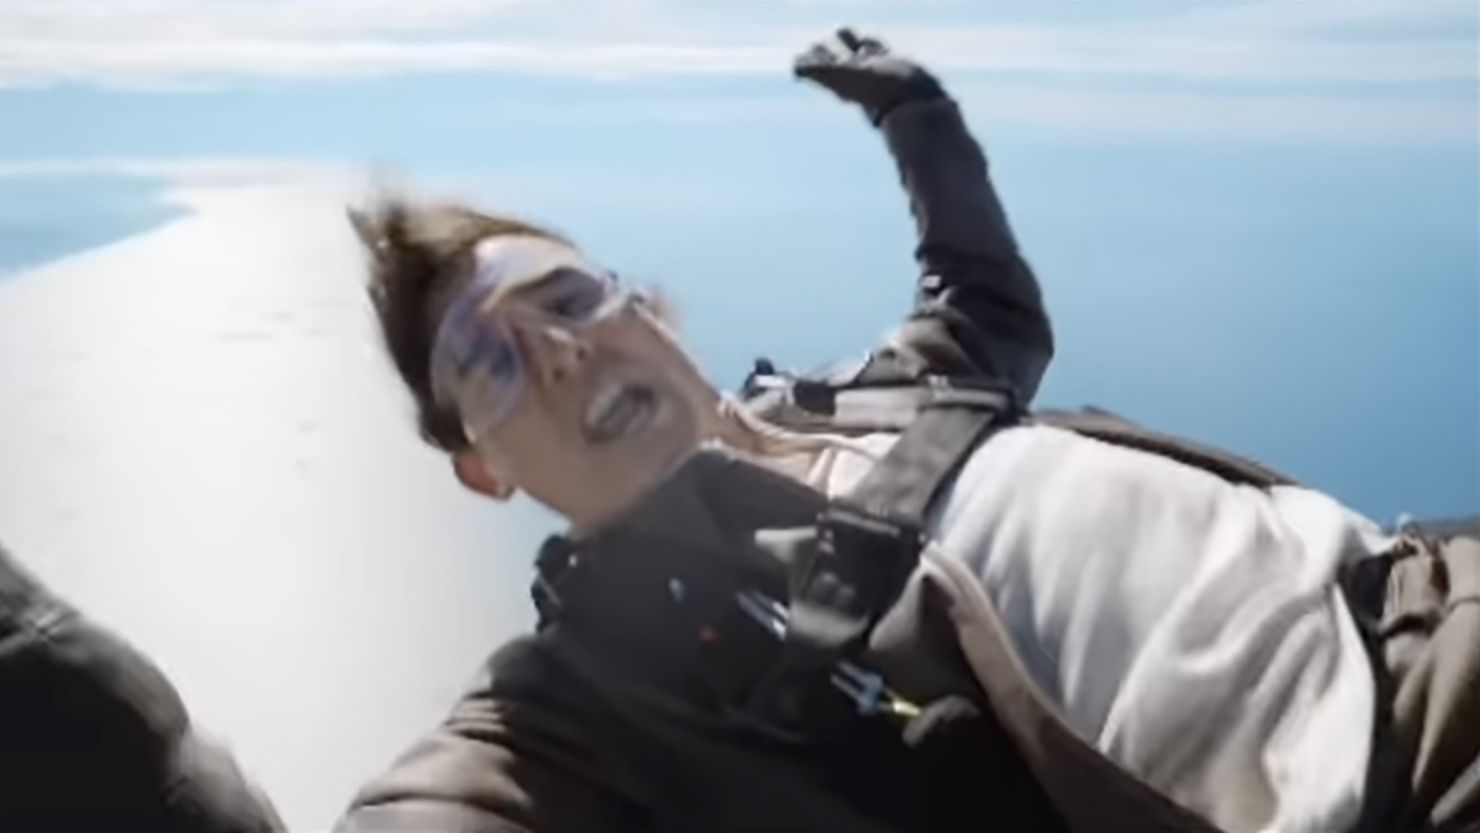 Tom Cruise went into free-fall over South Africa.